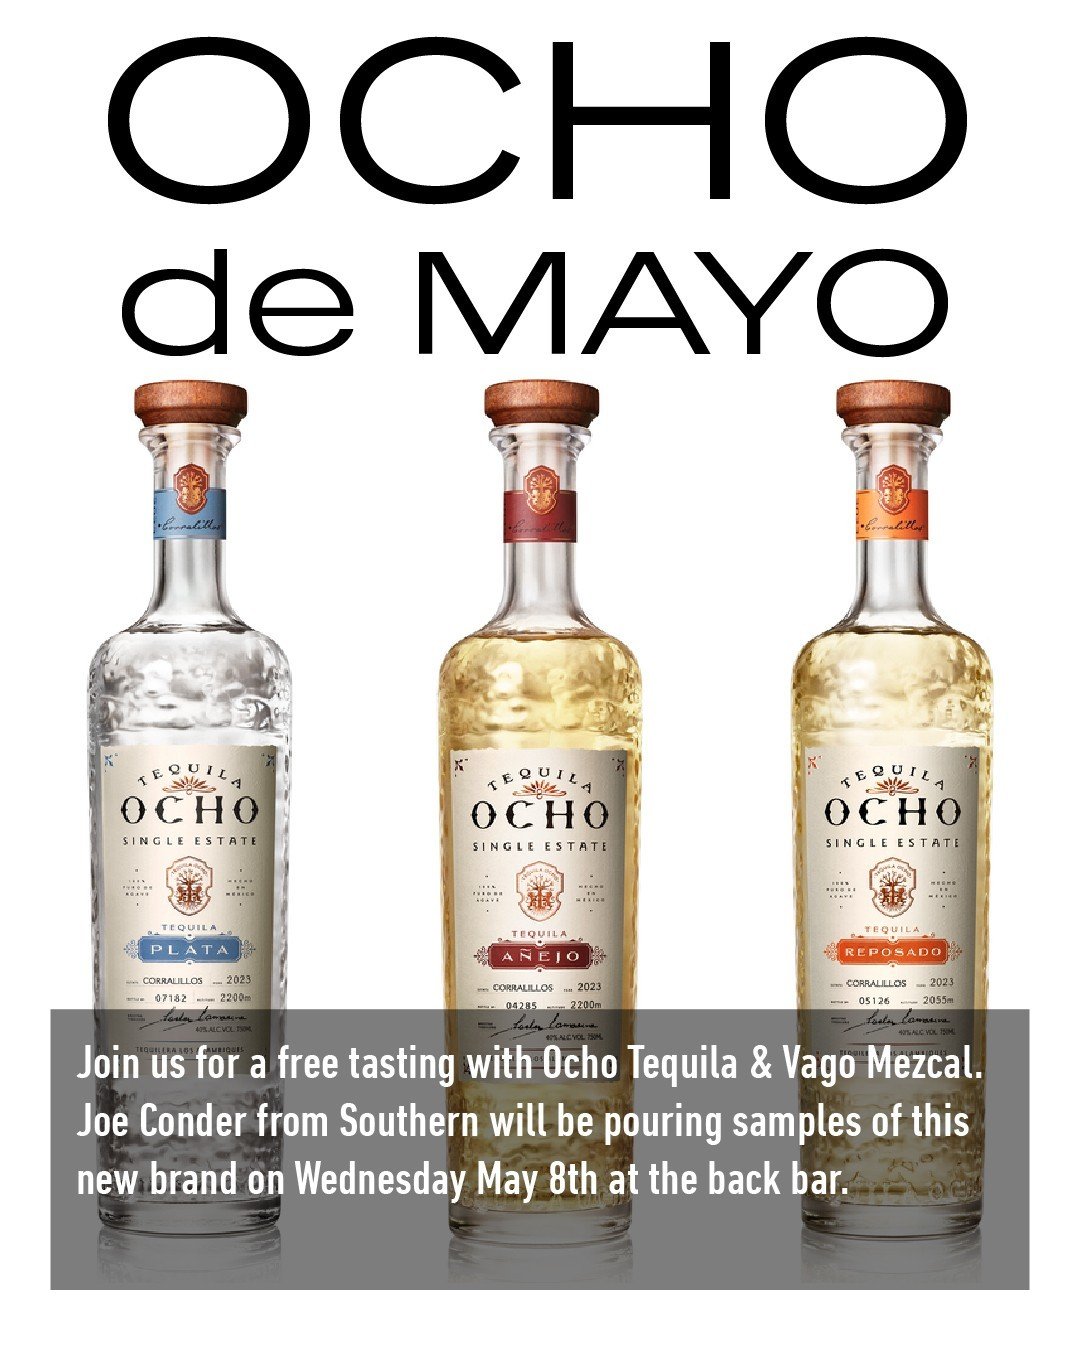 Join us for a free tasting with Ocho Tequila &amp; Vago Mezcal. Joe Conder from Southern will be pouring samples of this new brand on Wednesday evening, May 8th, at the back bar.